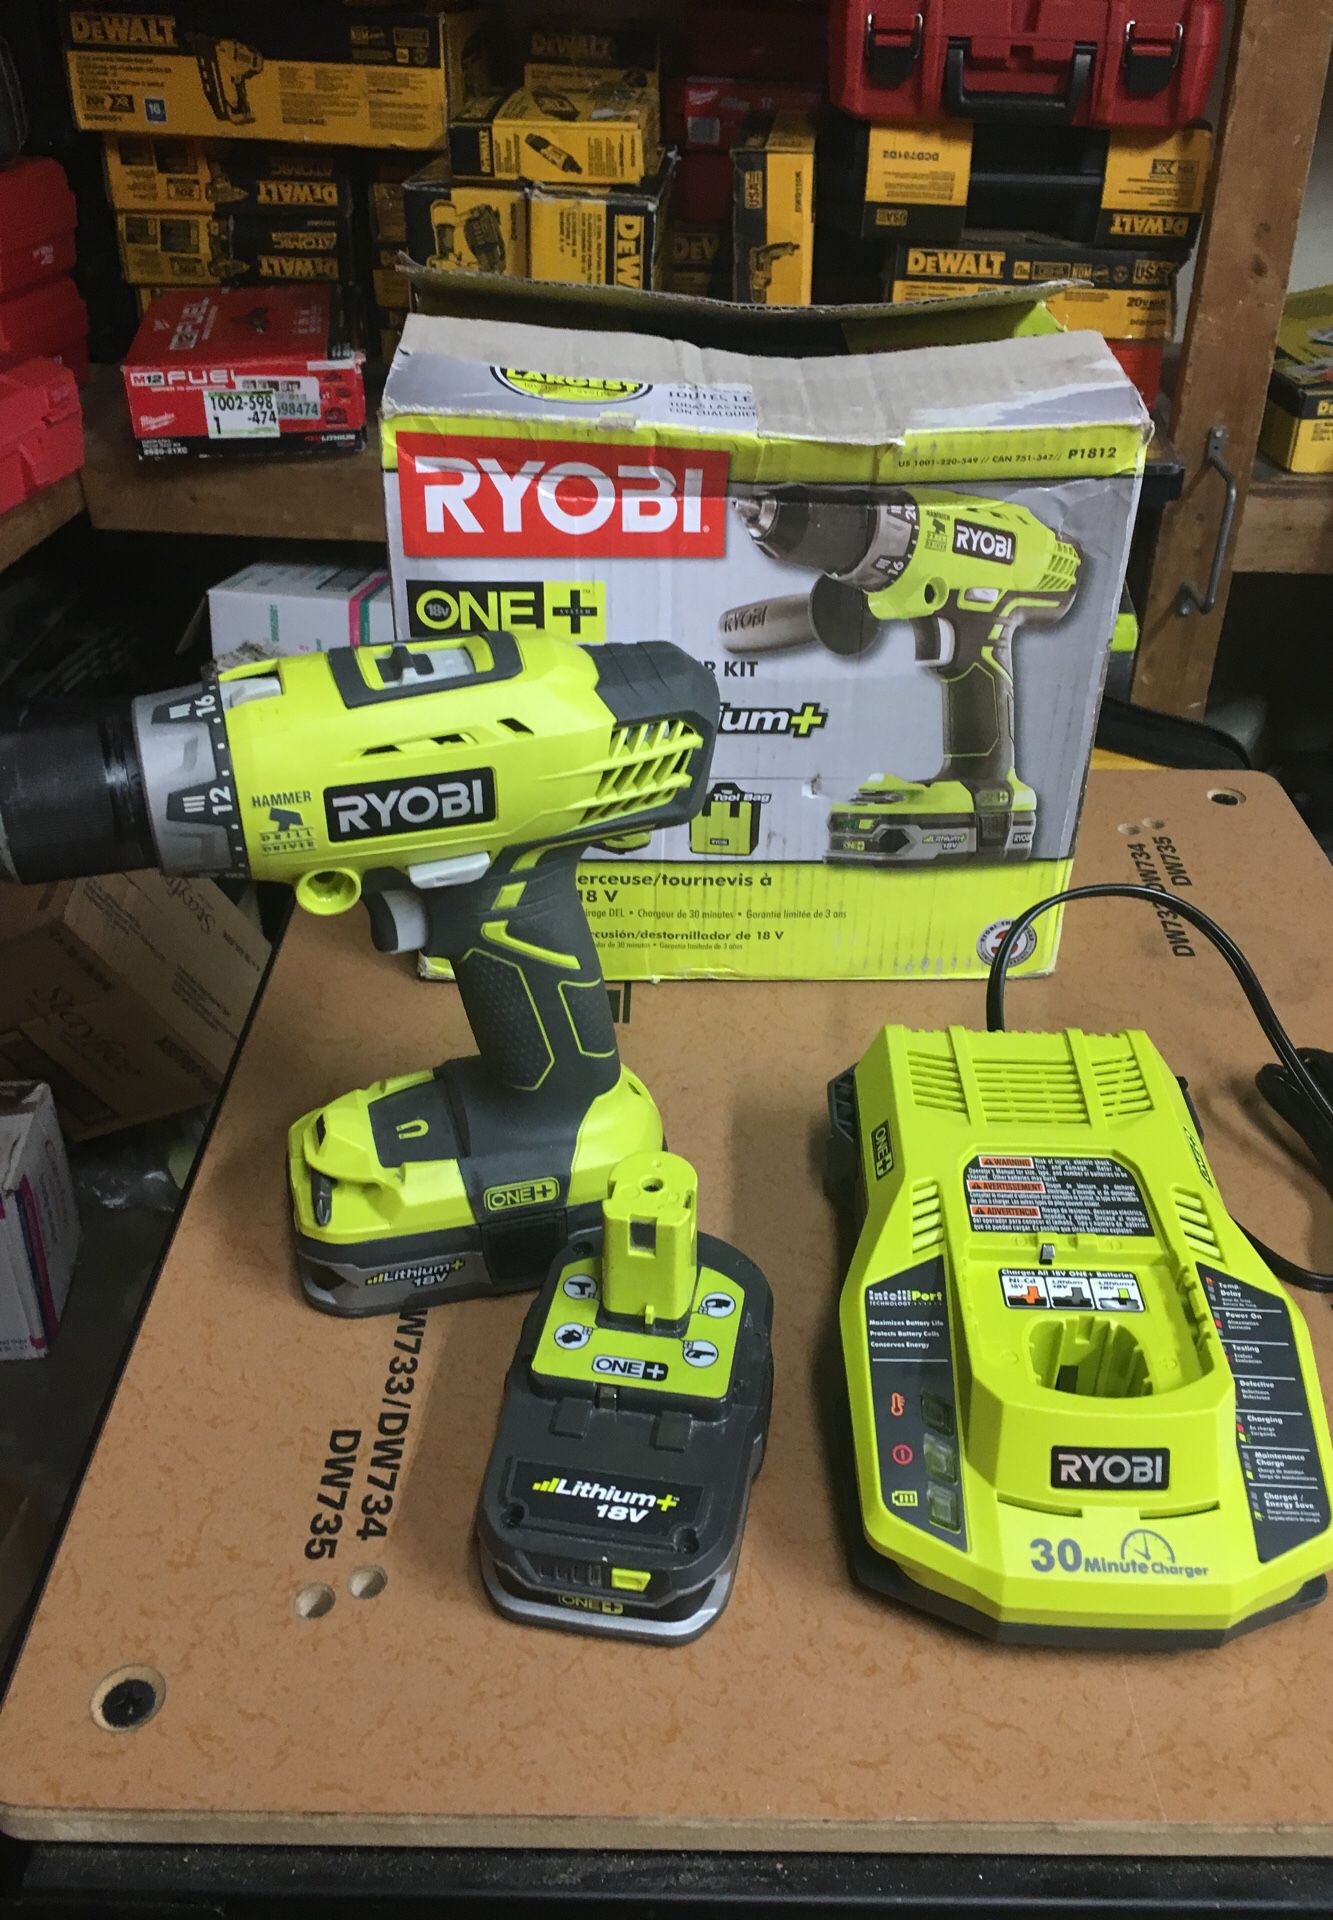 RYOBI 18-Volt ONE+ Lithium-Ion Cordless 1/2 in. Hammer Drill/Driver Kit with (2) 1.5 Ah Batteries, Charger, and Tool Bag